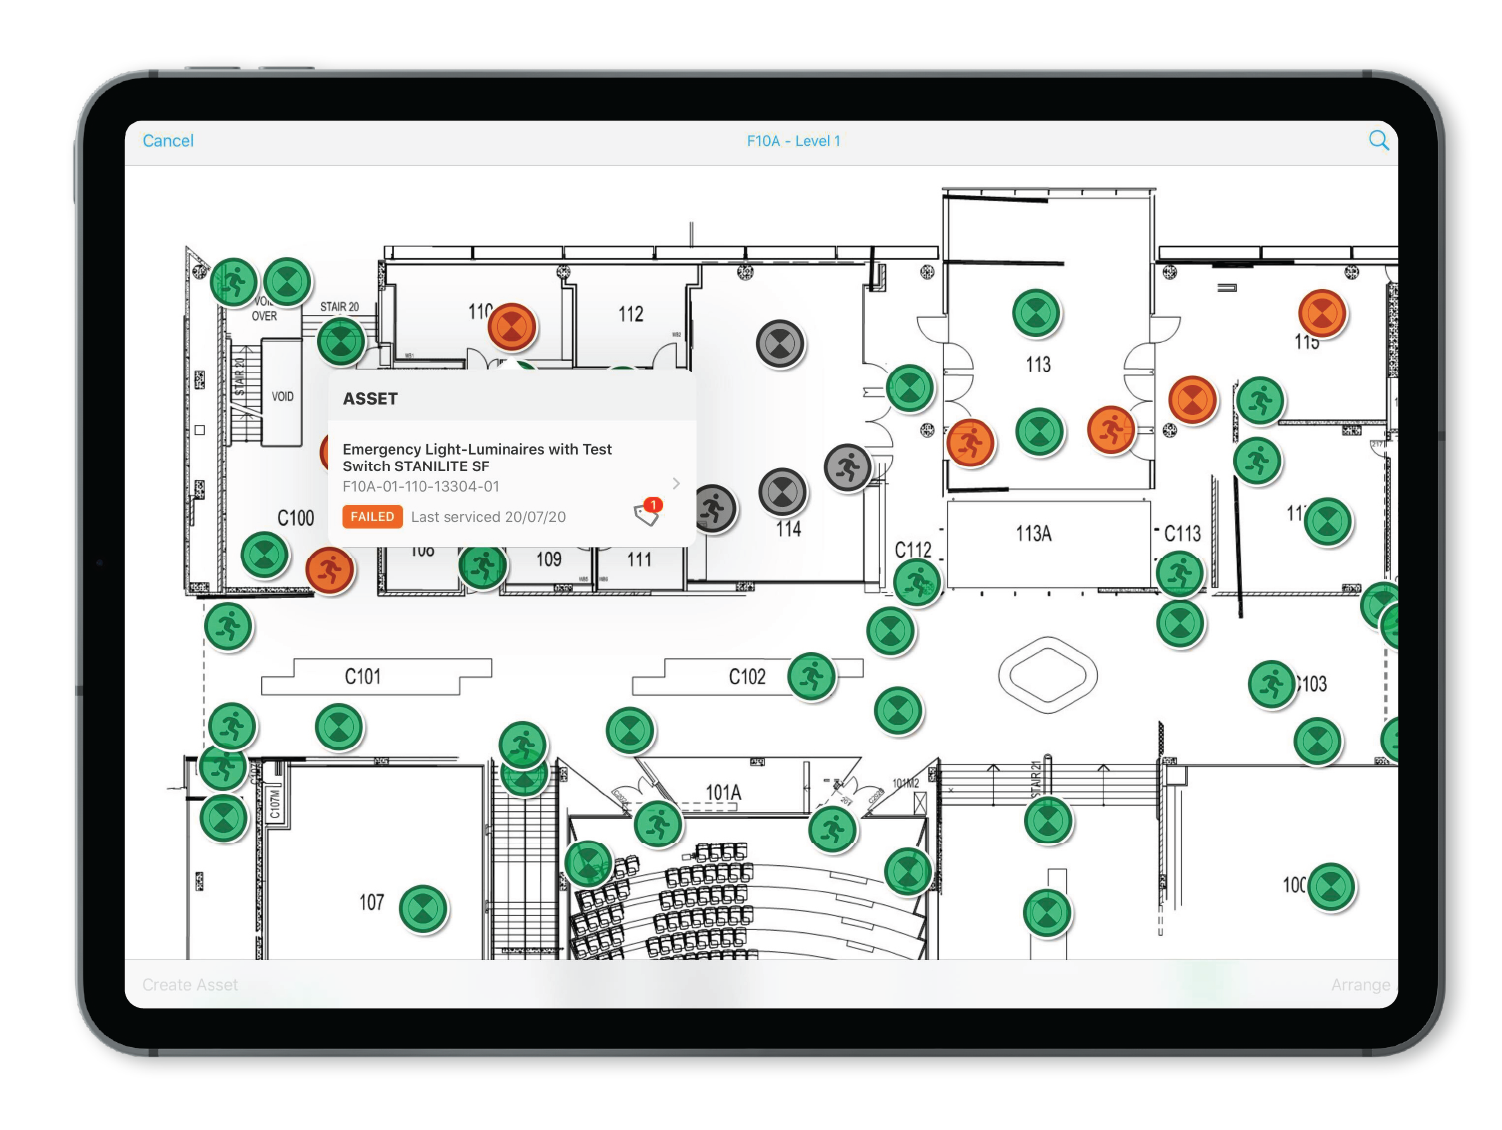 Geospatial Floorplans: Reduce the time spent looking for assets with floorplans and geospatial mapping.